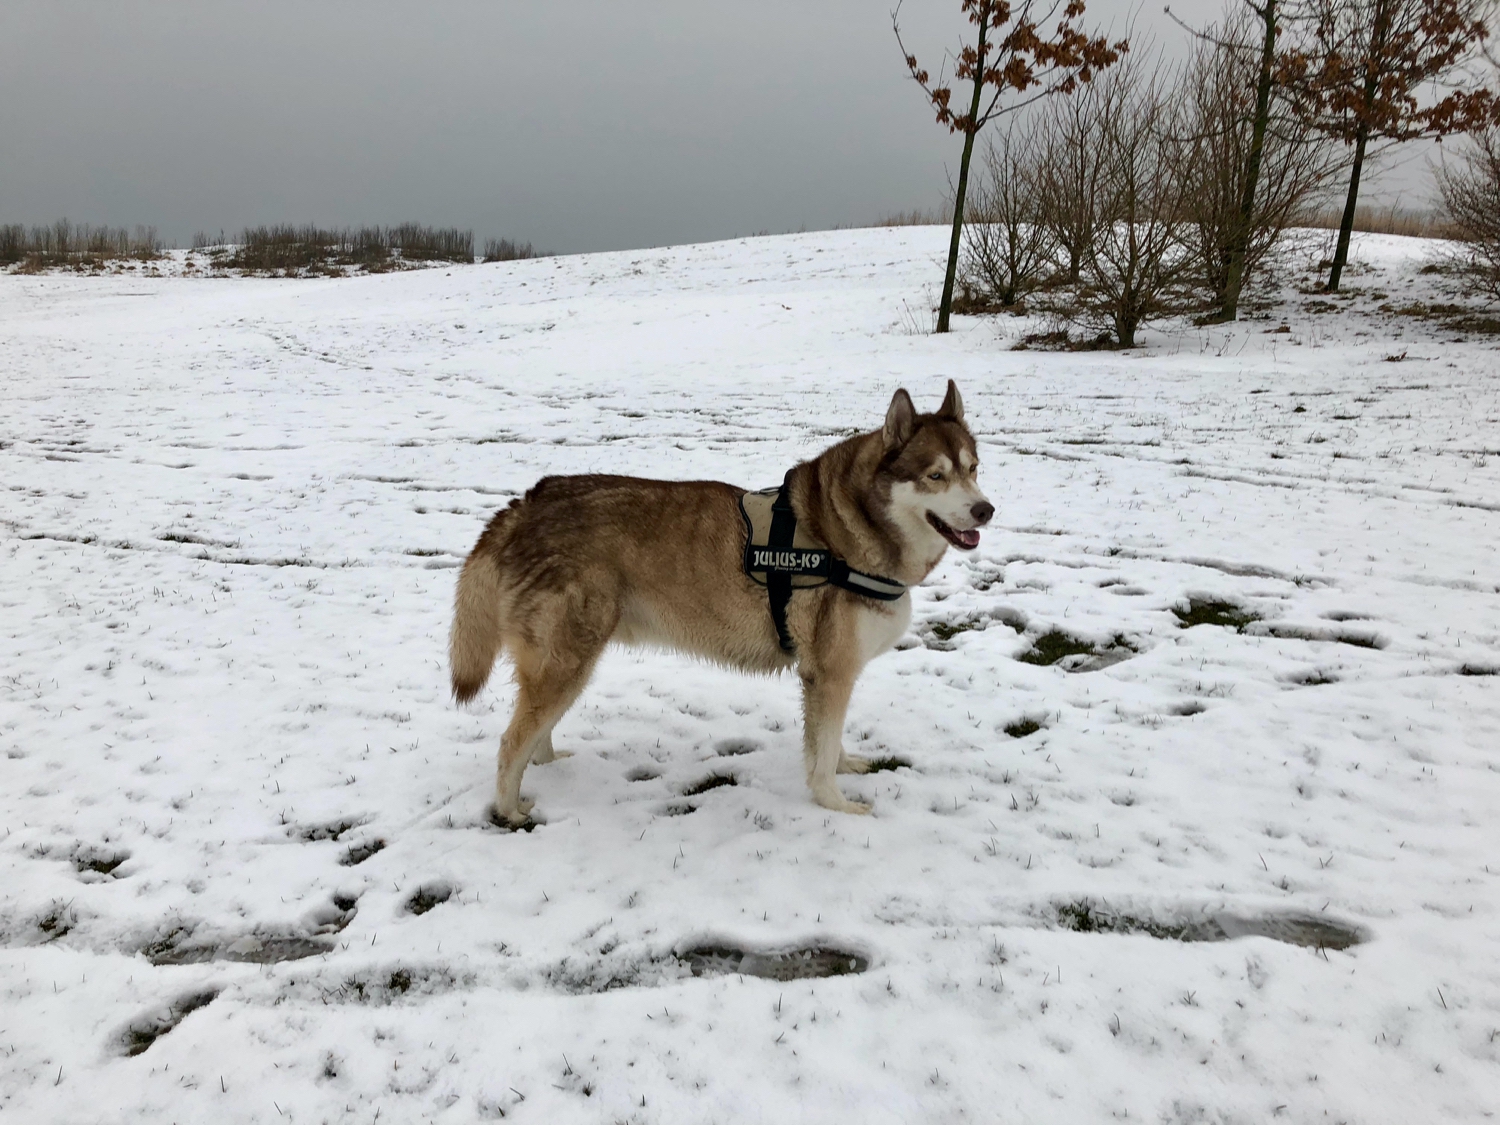 Oskar the huskamute standing in a field covered in snow.